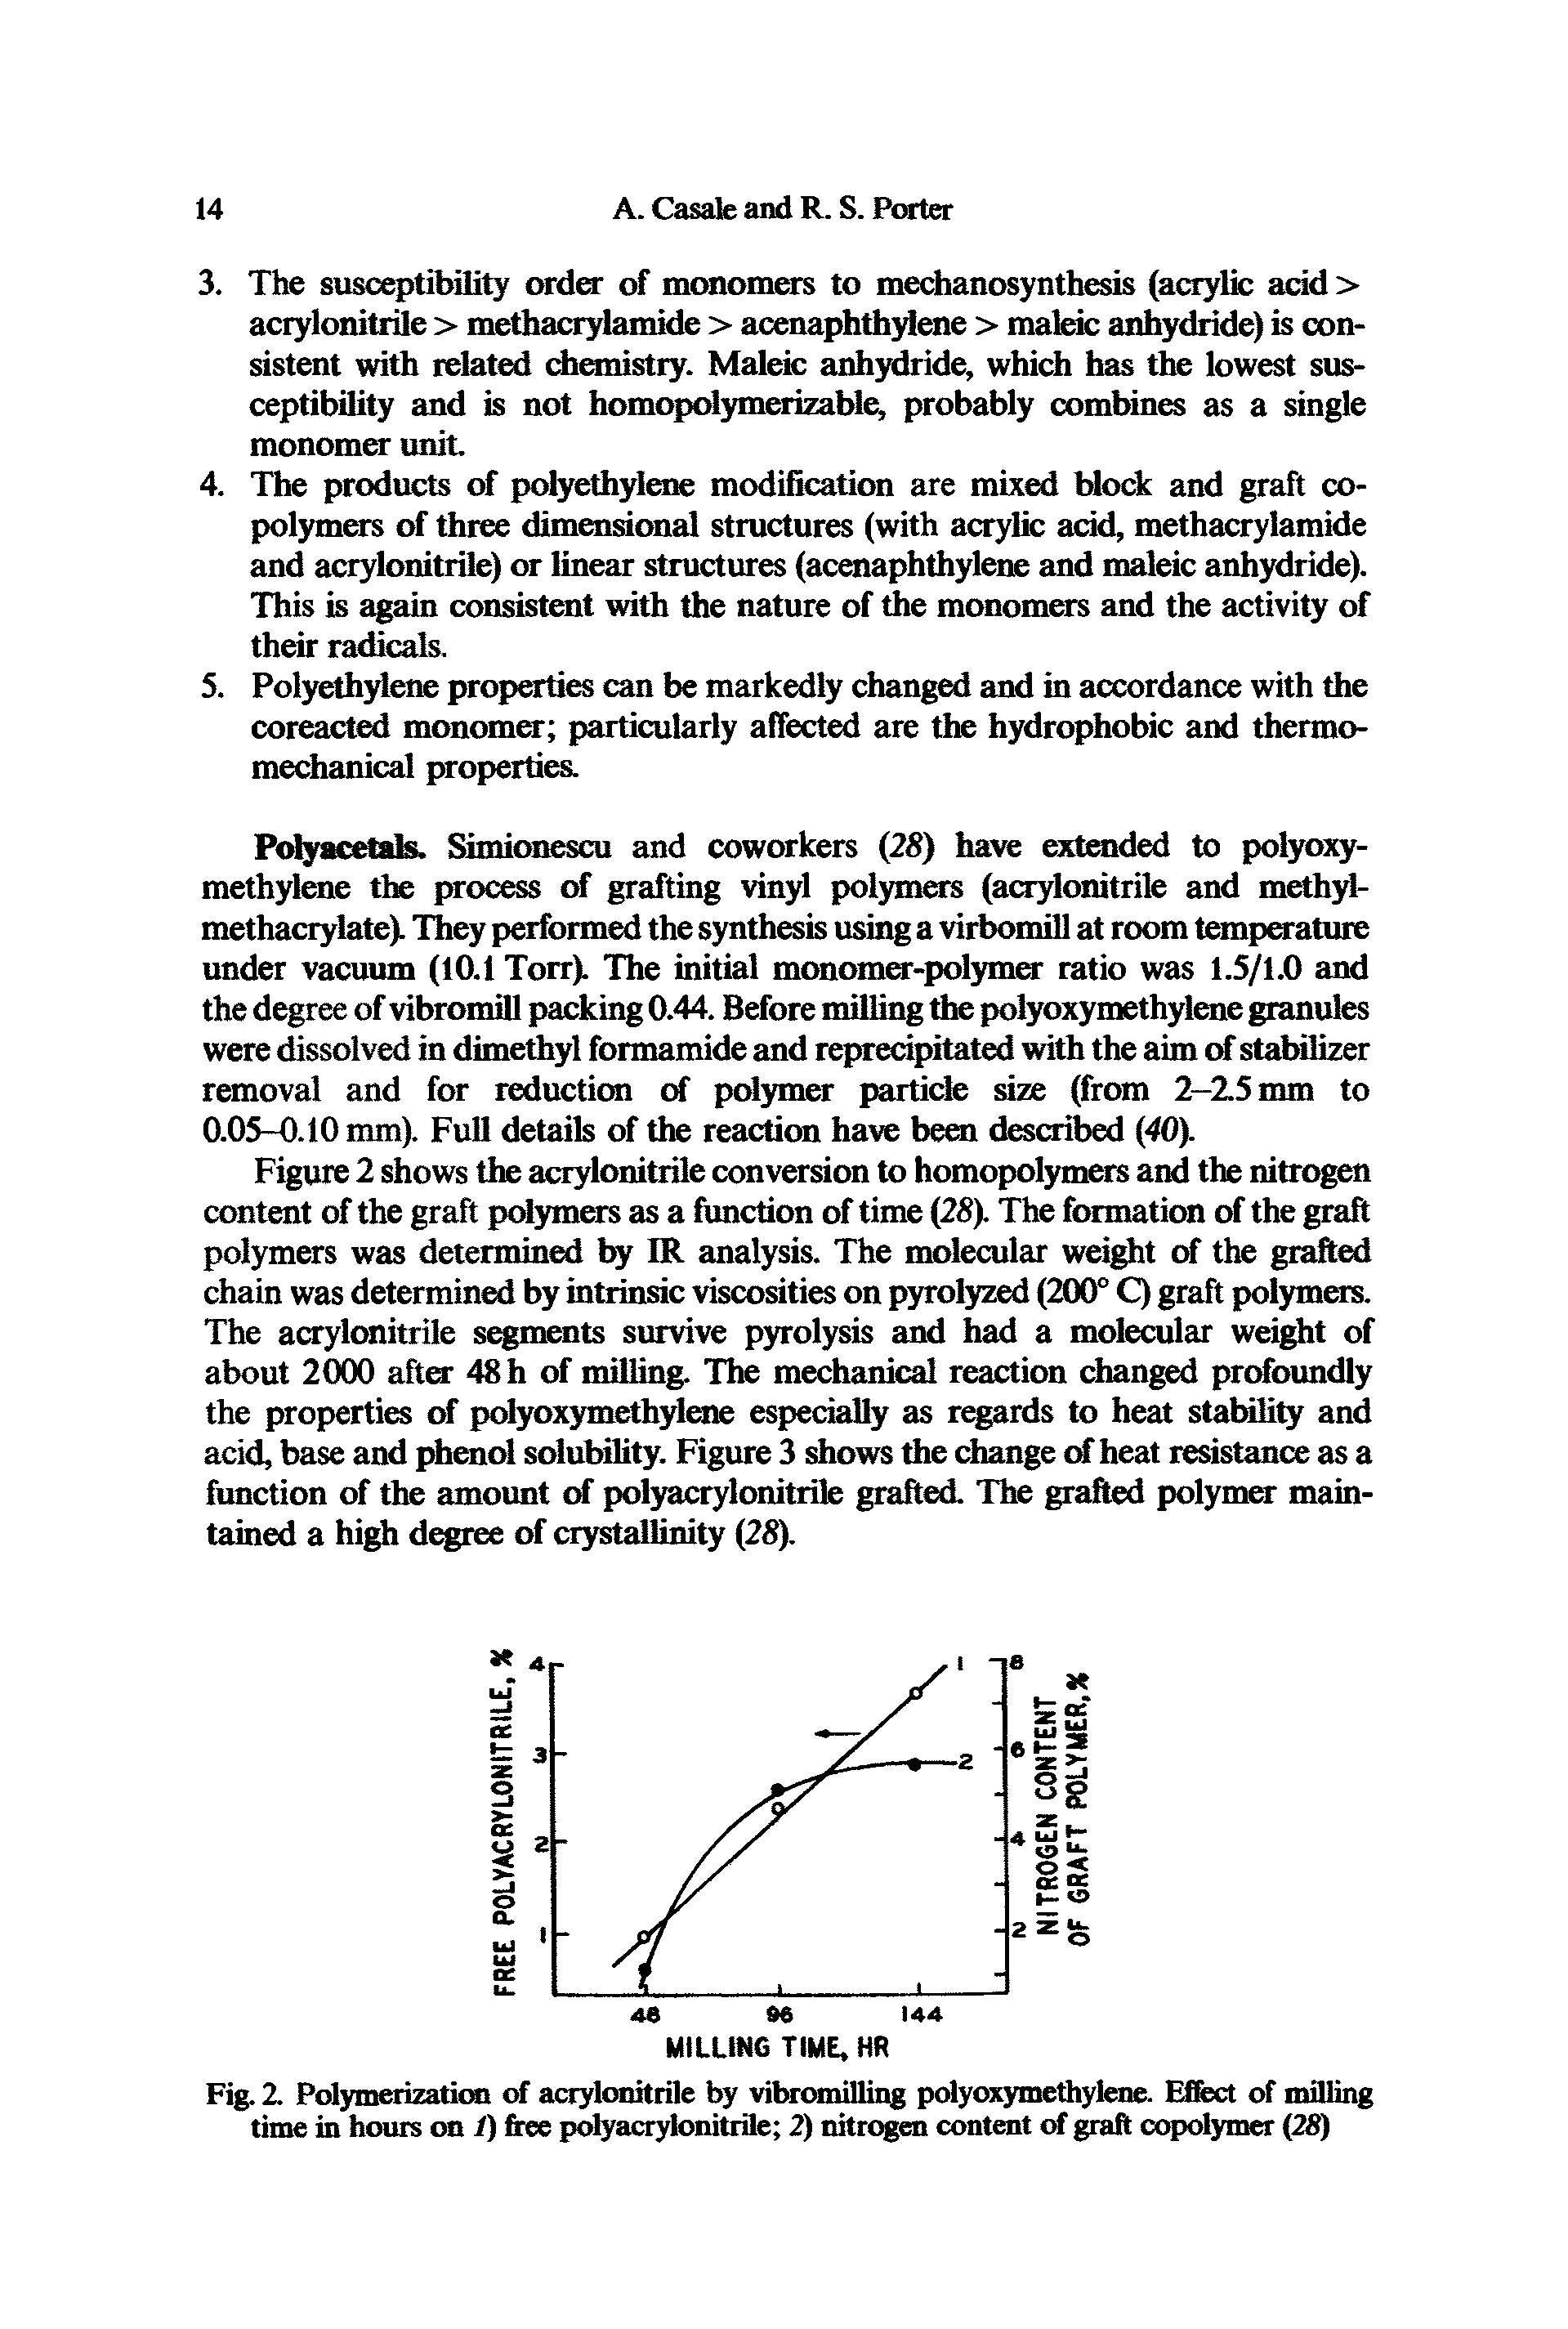 Fig. 2. Polymerization of acrylonitrile by vibromilling polyoxymethylene. Effect of milling time in hours on /) free polyacrylonitrile 2) nitrogen content of graft copolymer (28)...